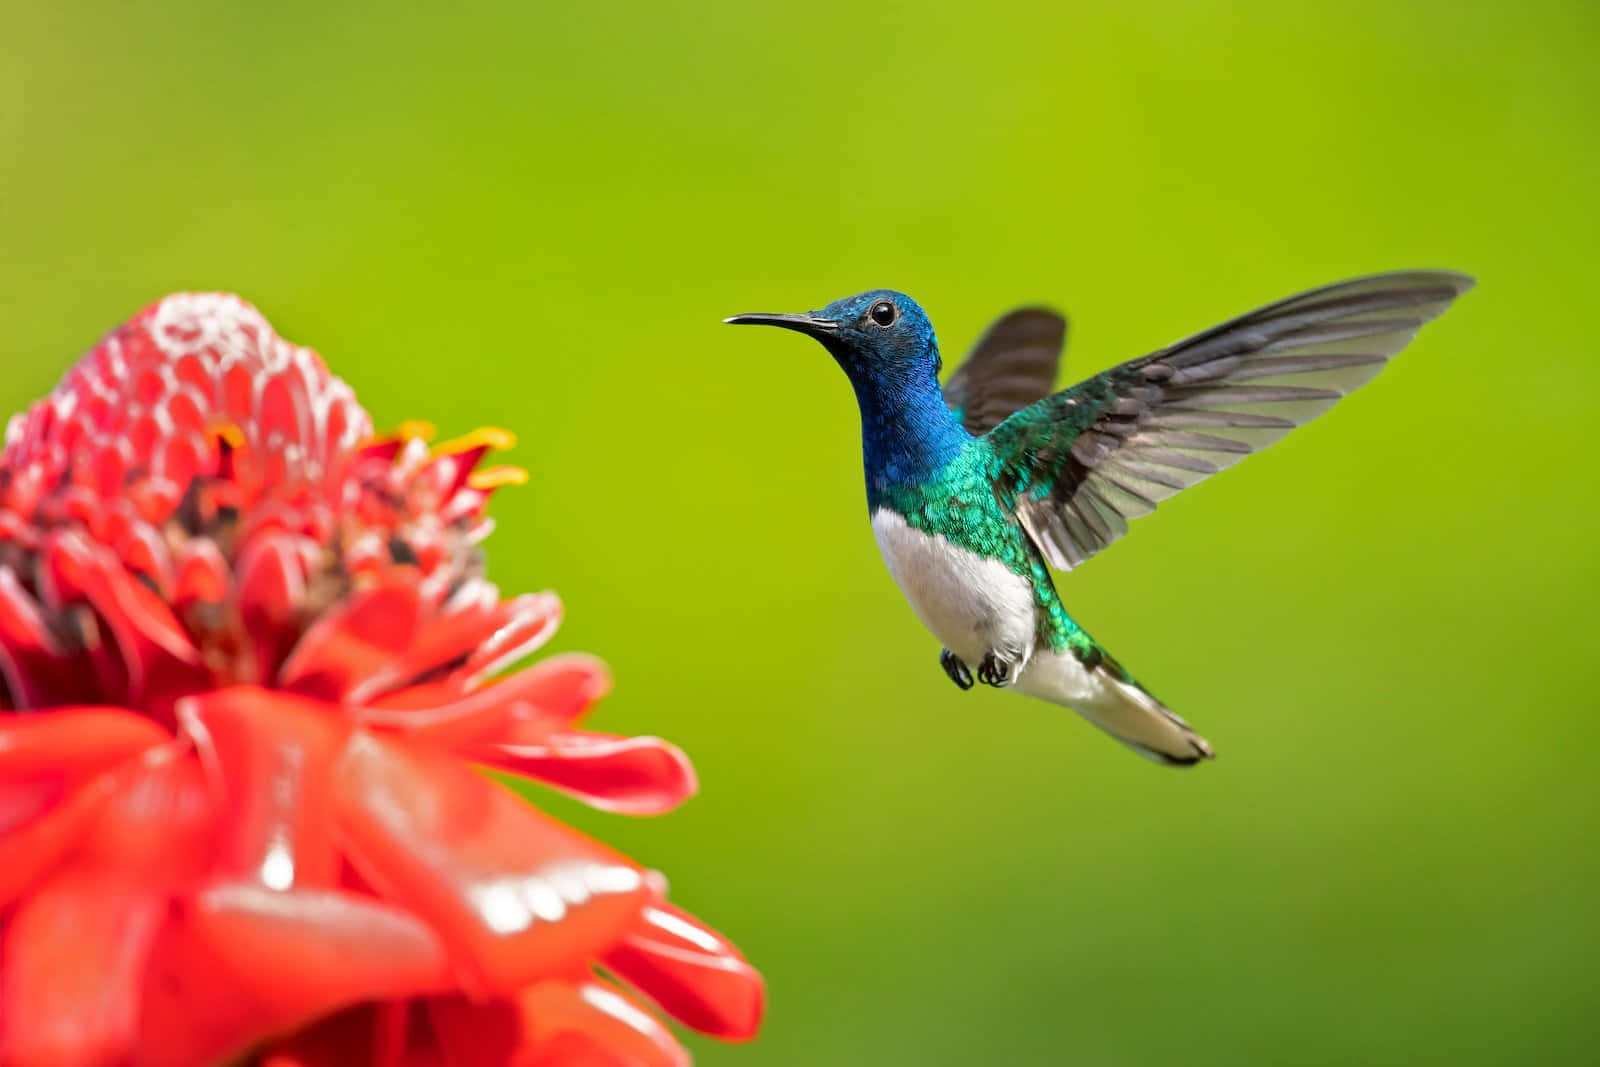 A beautiful hummingbird peacefully perched against a bright blooming flower